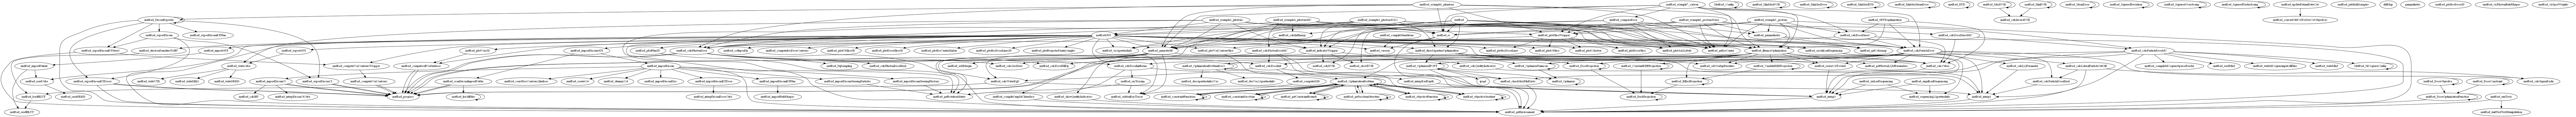 Dependency Graph for the whole toolbox